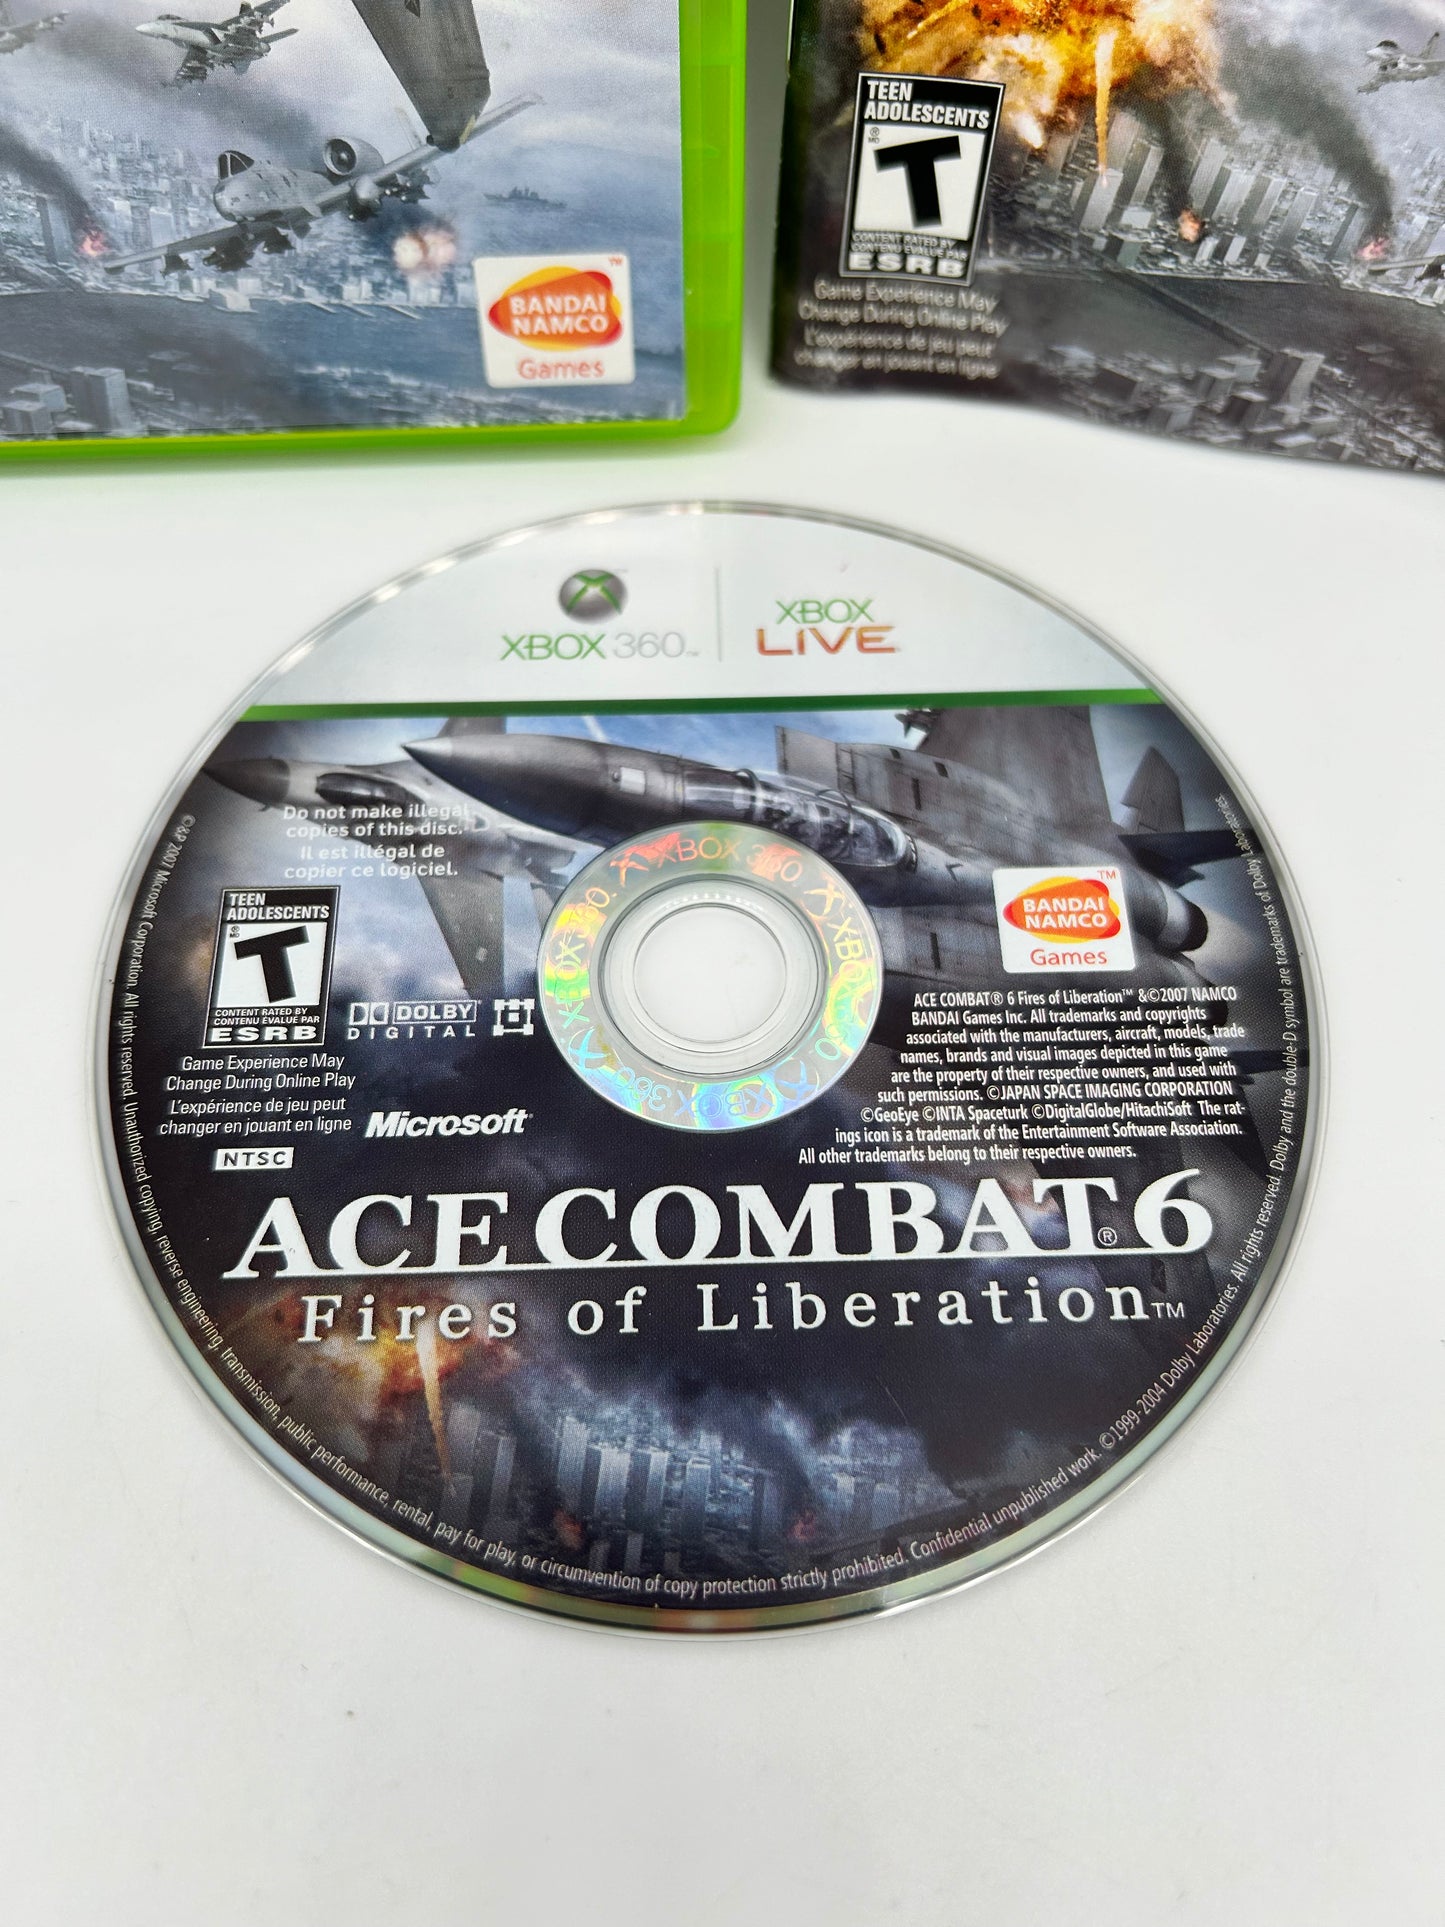 MiCROSOFT XBOX 360 | ACE COMBAT 6 FiRES OF LiBERATiON